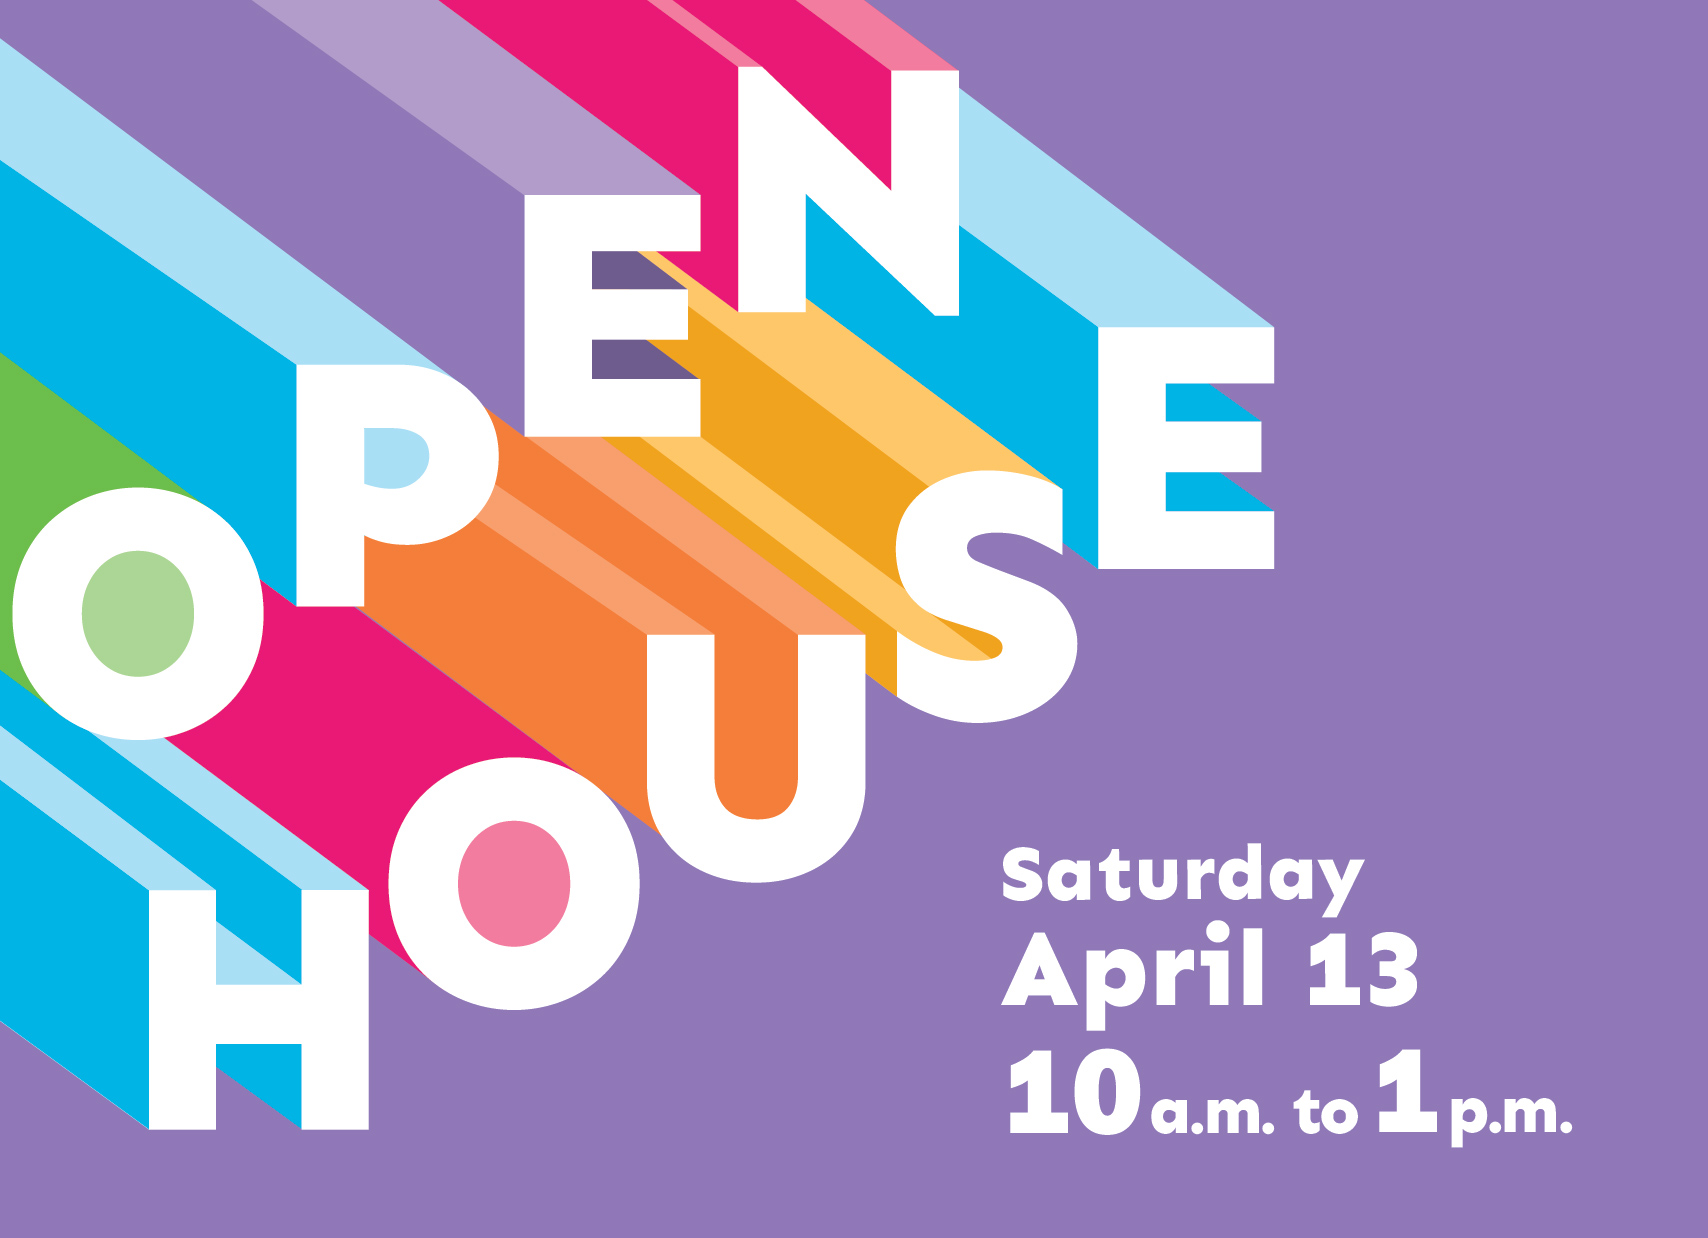 CLC Open House on Saturday April 13 from 10 a.m. to 1 p.m.